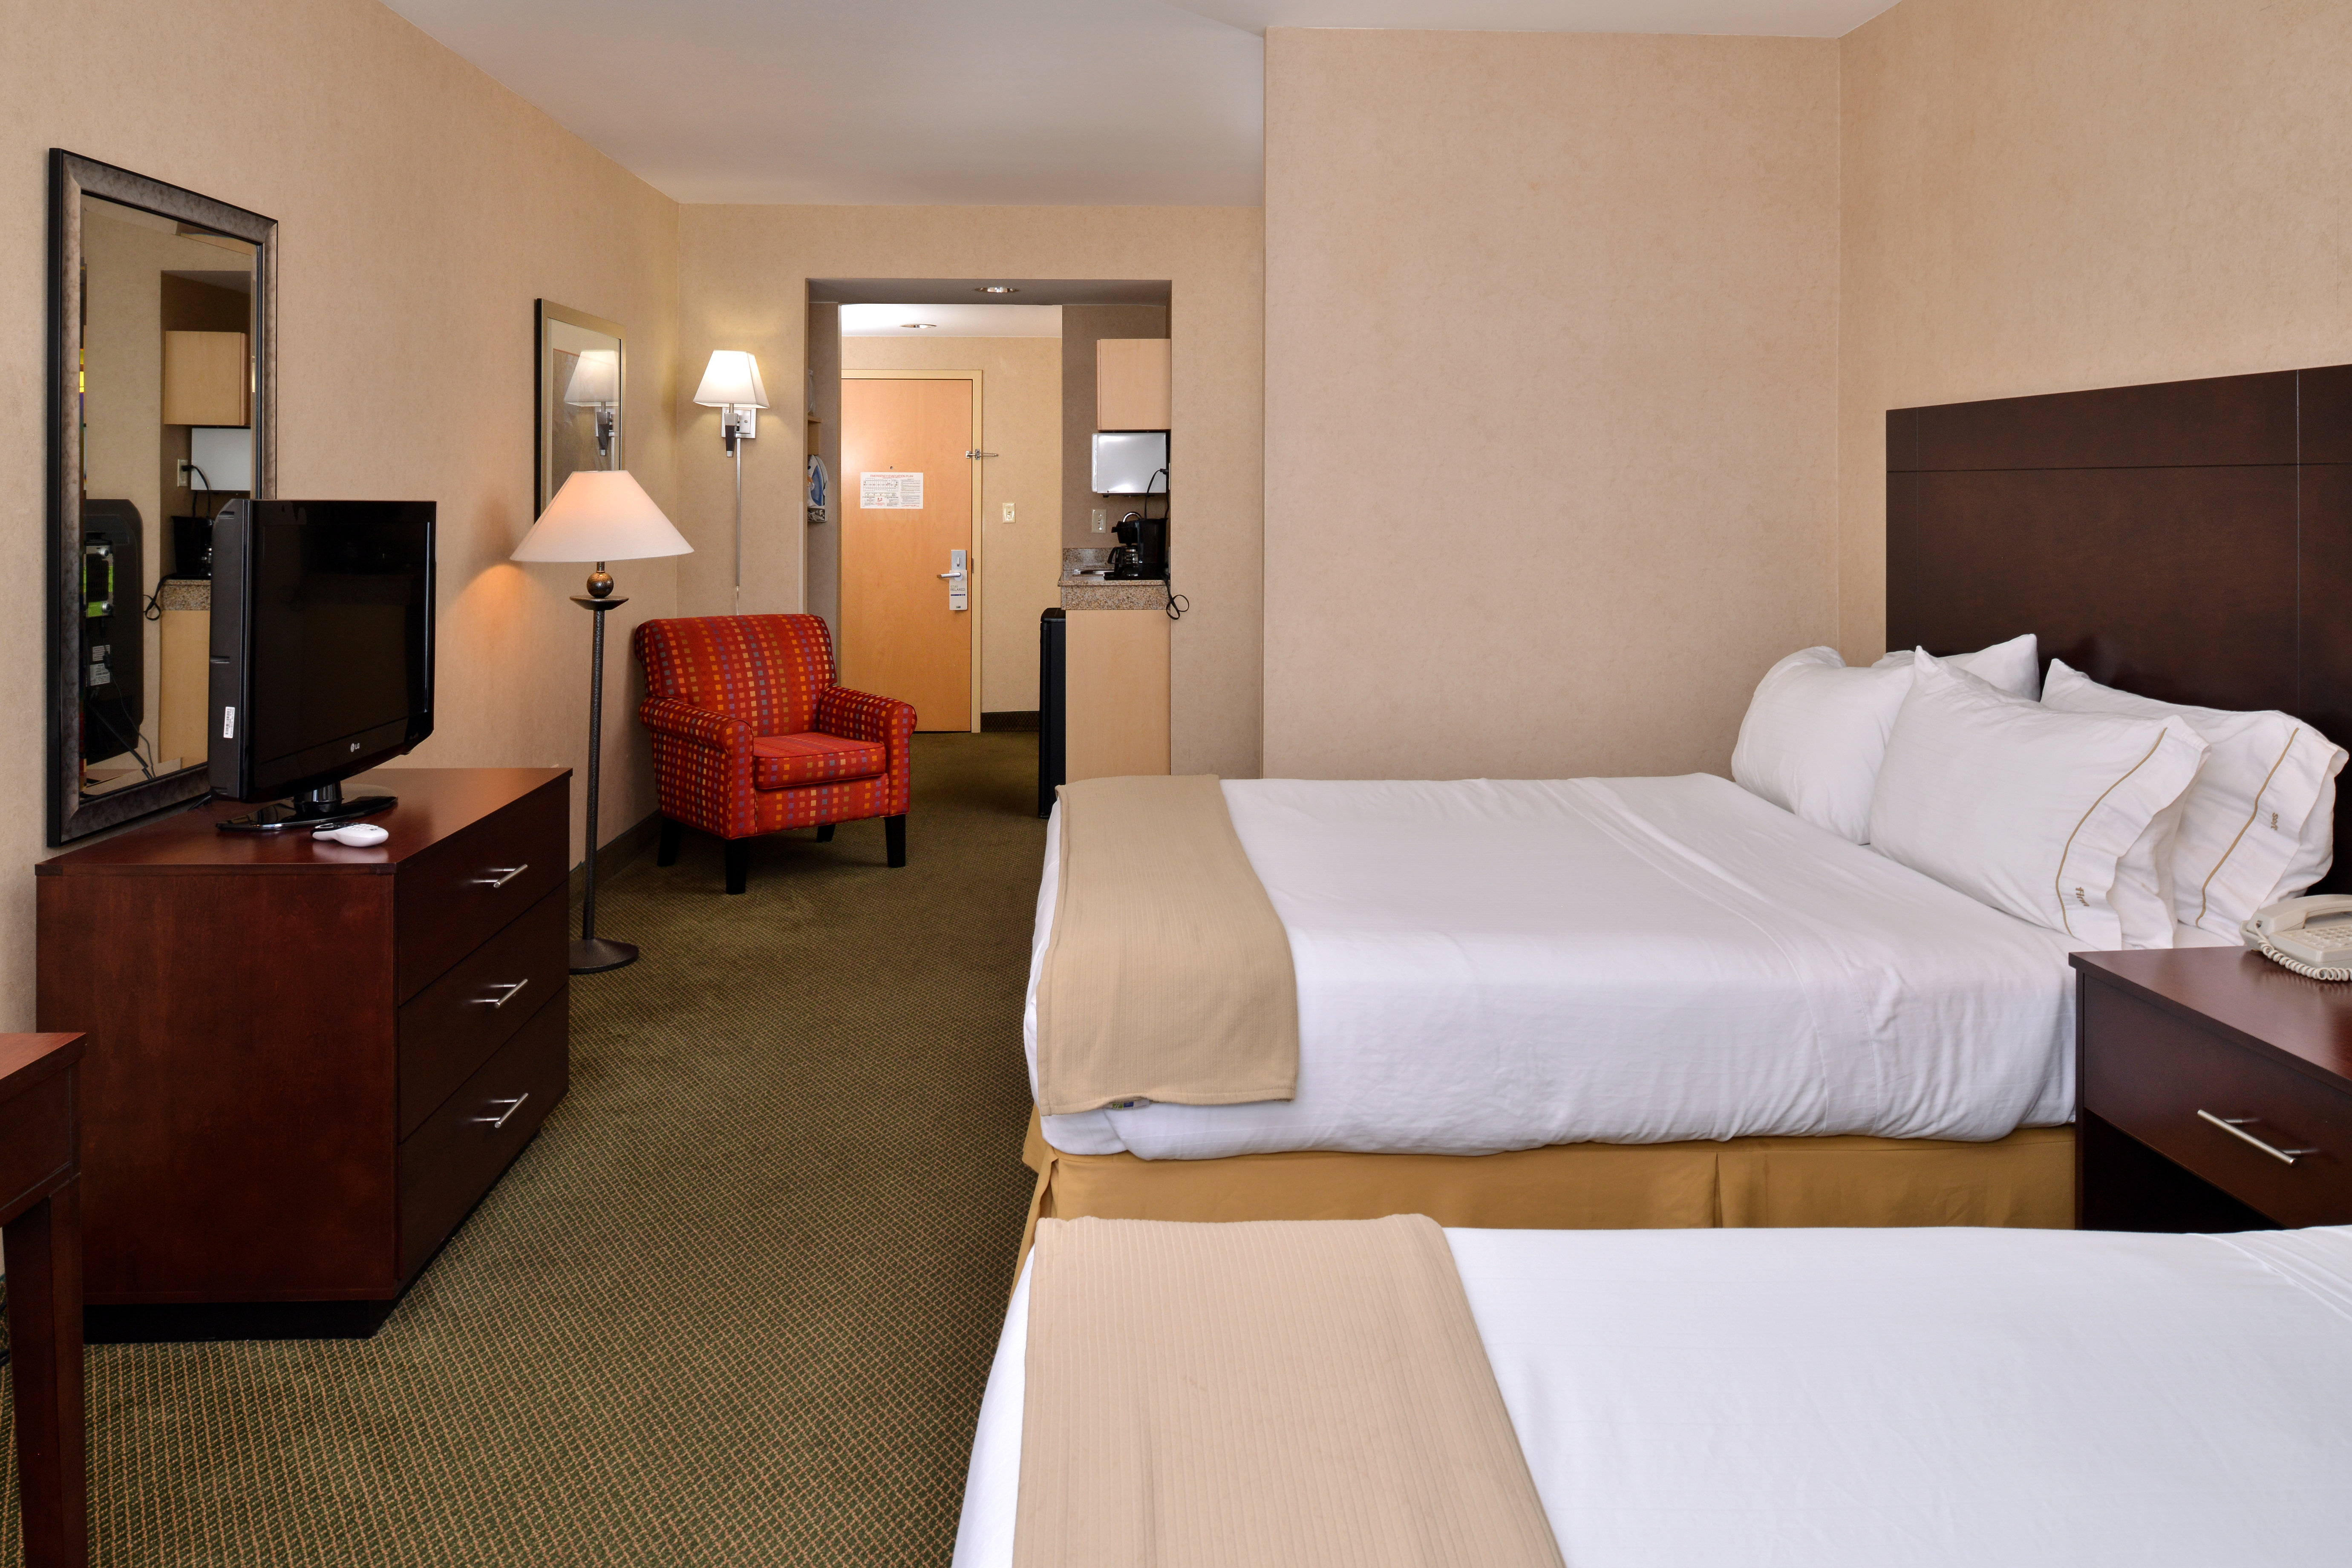 The larger family will enjoy our suite with two beds and a sleeper